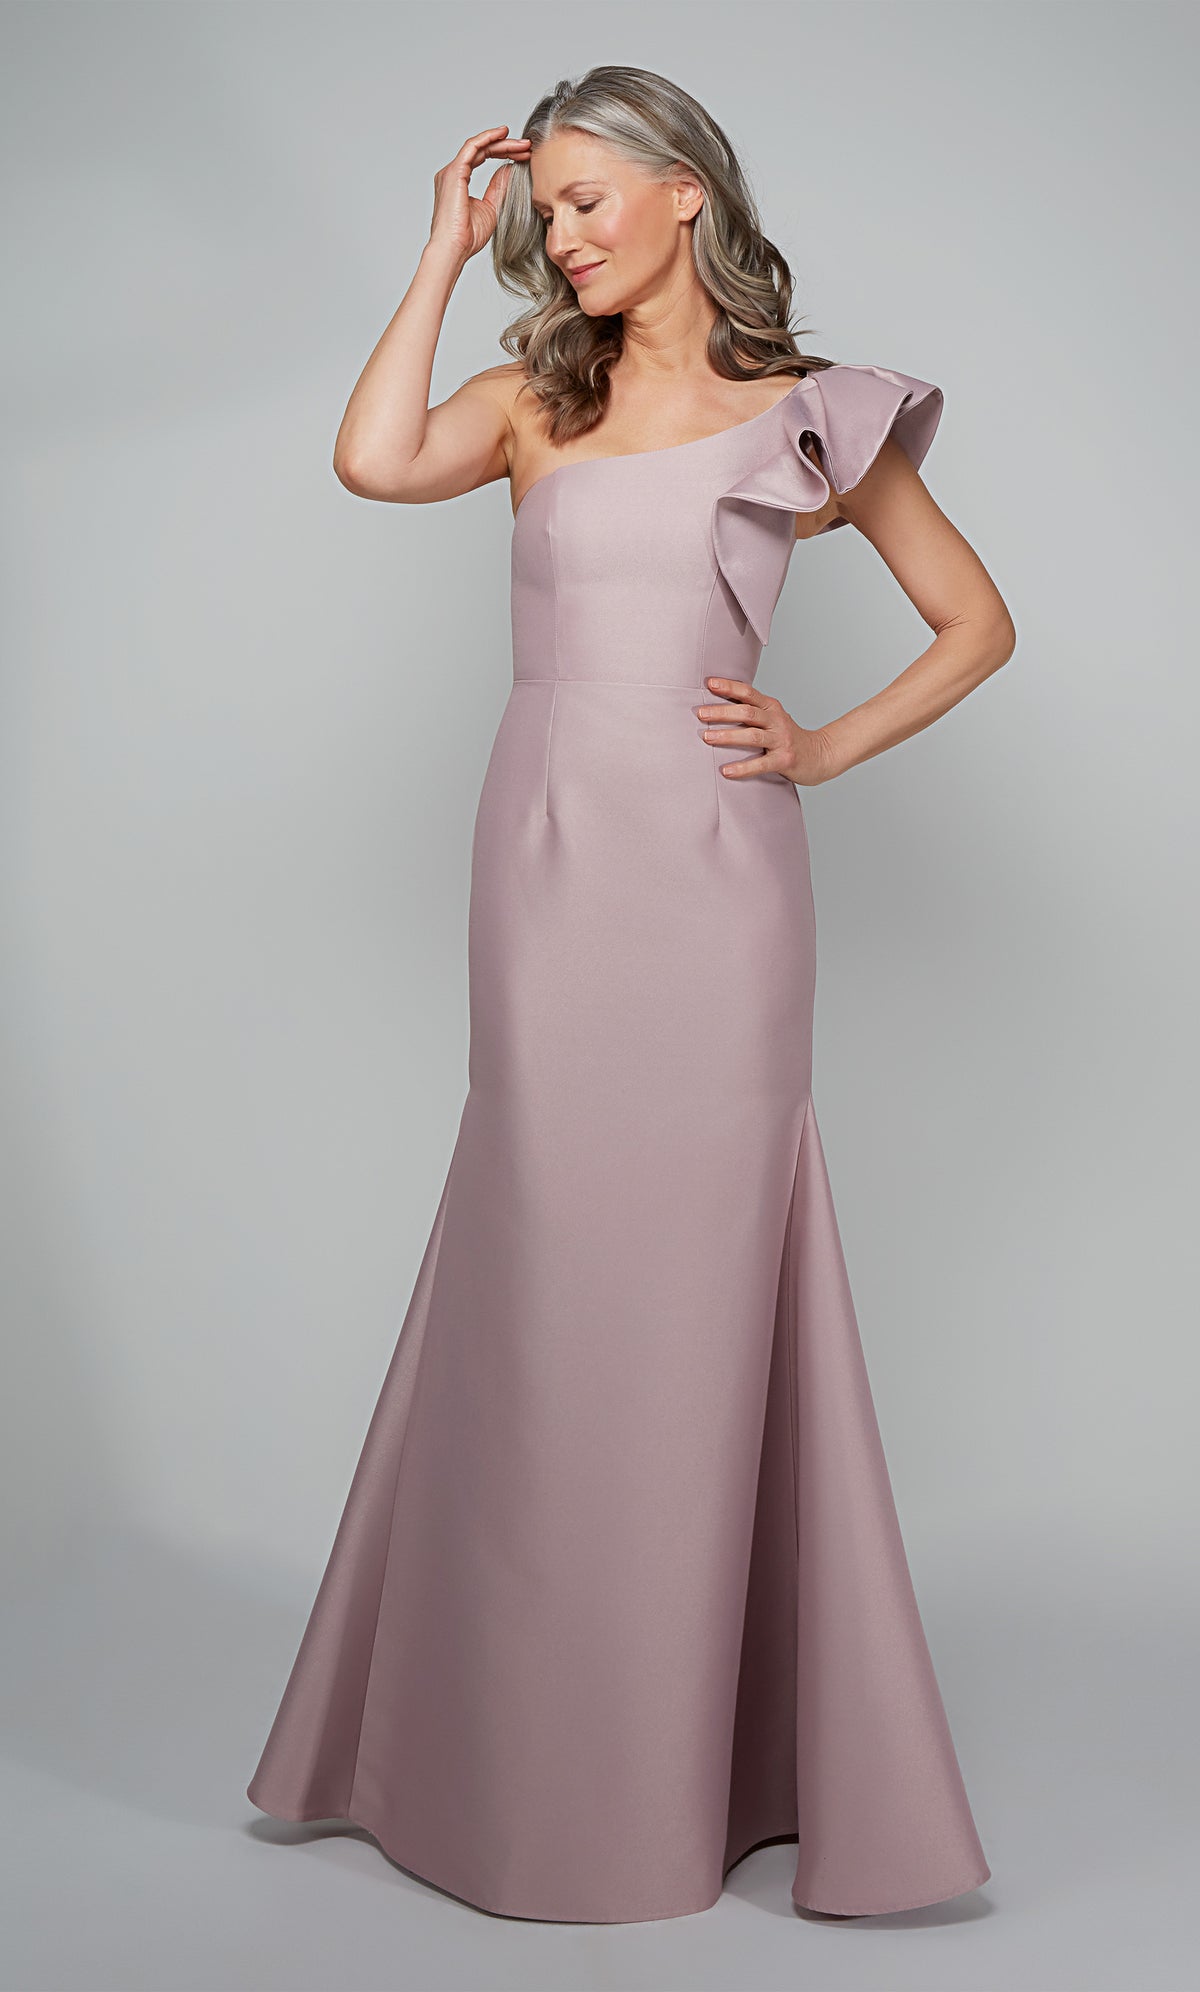 Fit and flare one shoulder ruffle dress in pink.